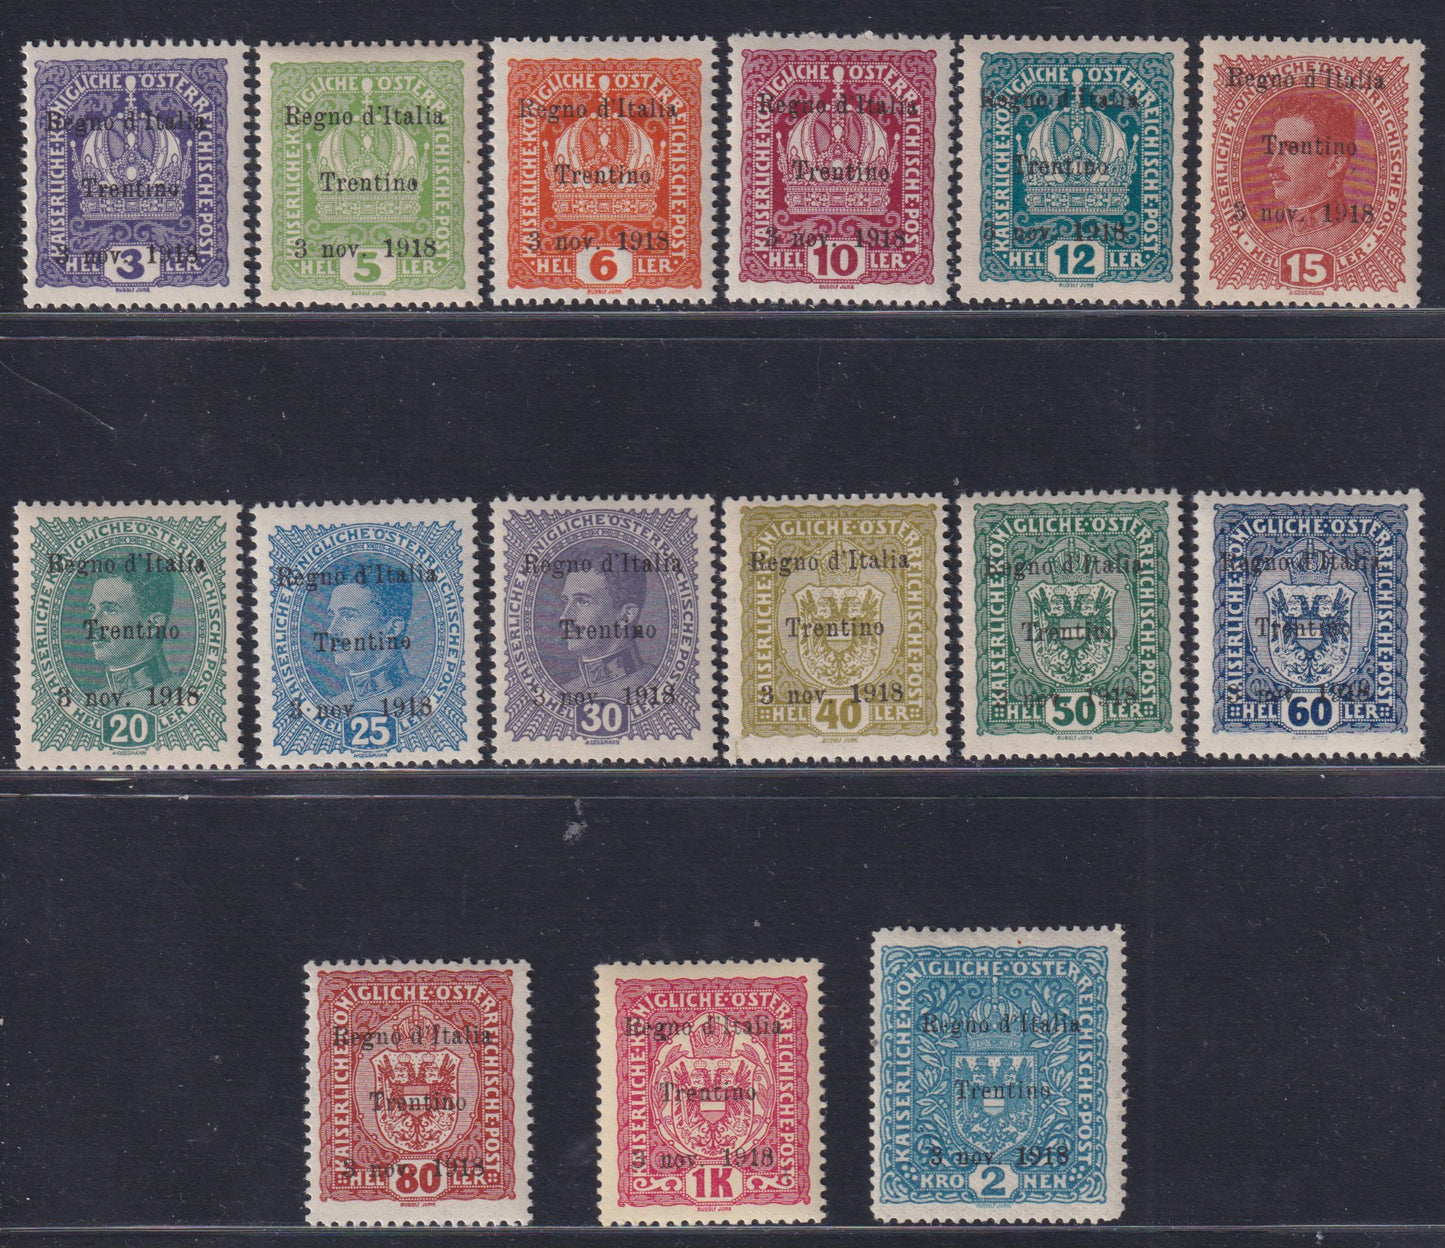 Tren3 - 1918 - Austrian stamps overprinted "Kingdom of Italy / Trentino / 8 Nov. 1918", new with intact gum (1/13 + 15/16)